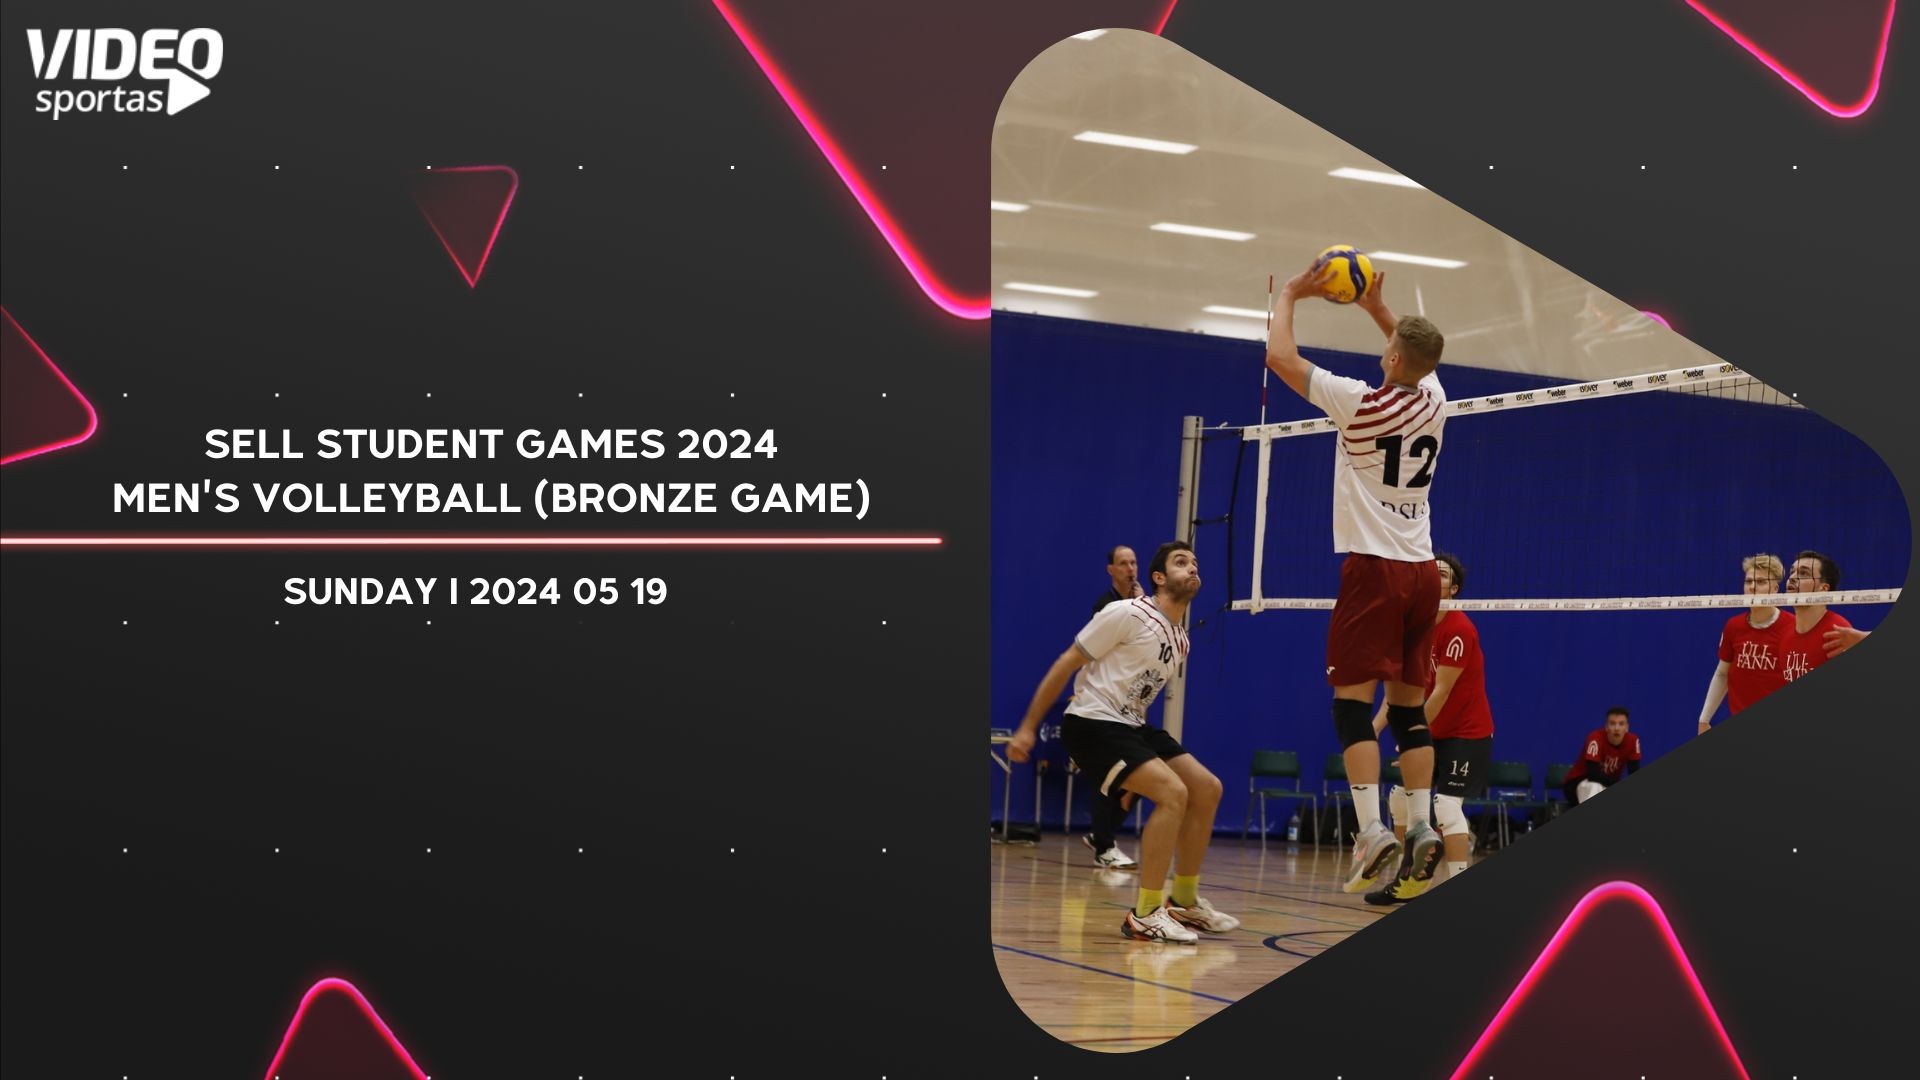 BRONZE GAME - SELL STUDENT GAMES 2024 (MEN'S VOLLEYBALL)